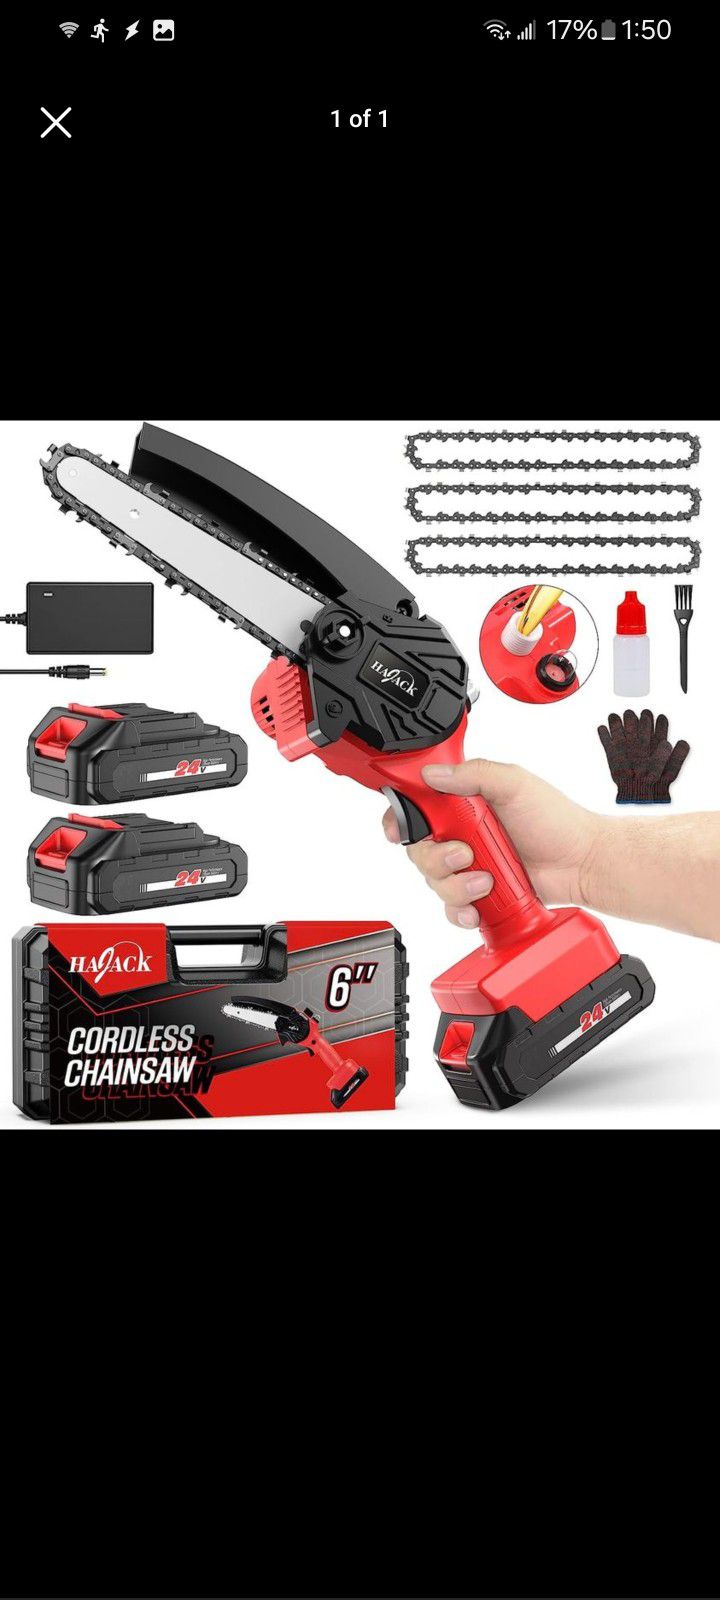 6-Inch, Cordless Mini Chain Saw with 3 Chains & 2 Battery, Handheld Small Chainsaw